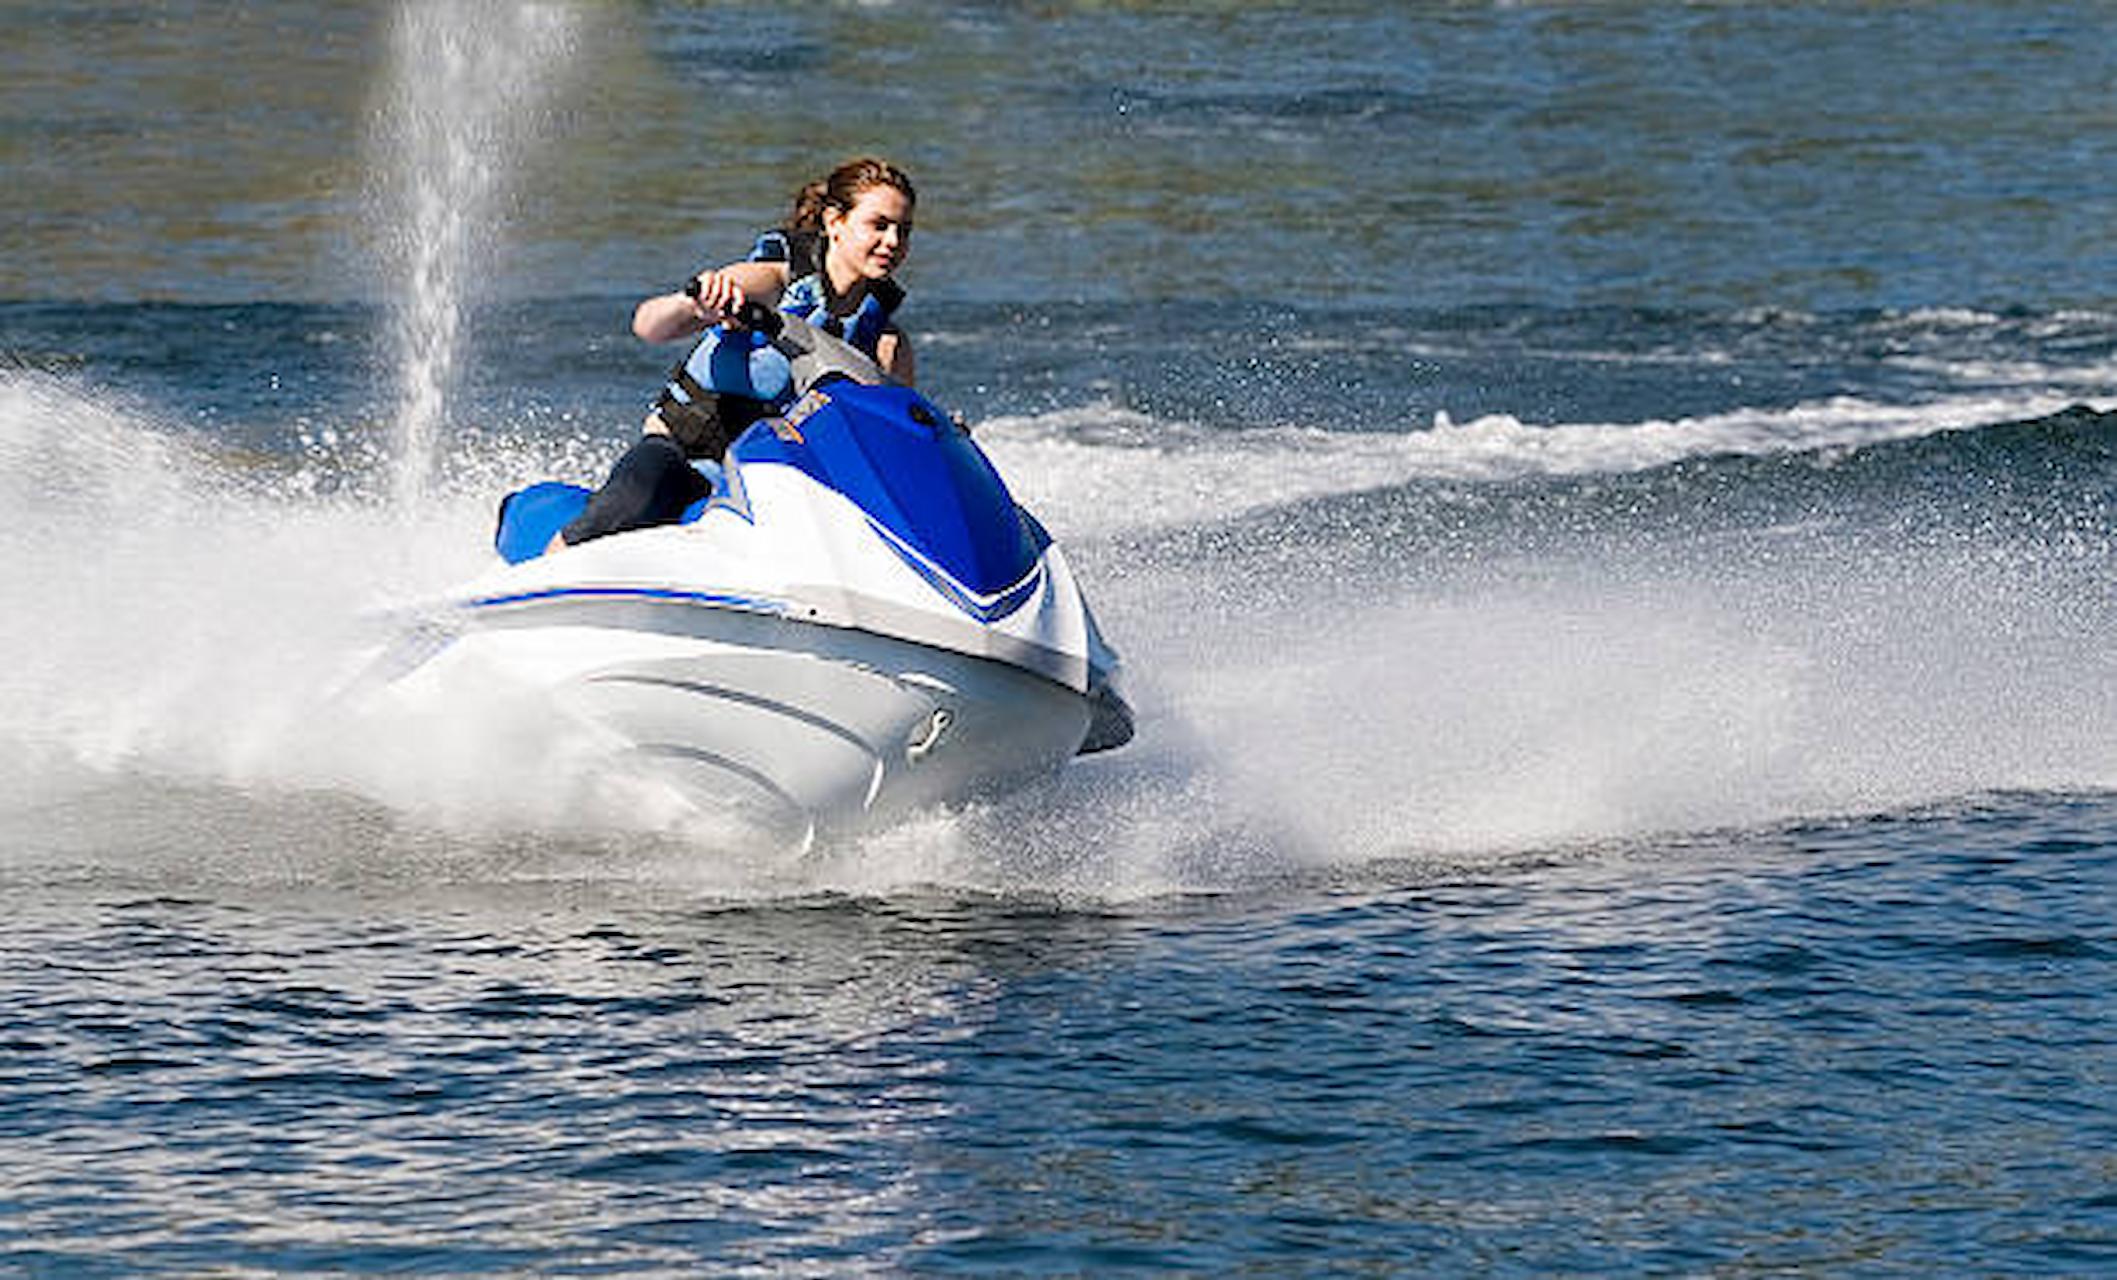 Acquiring New Jet Ski for sale And What You Need To Know